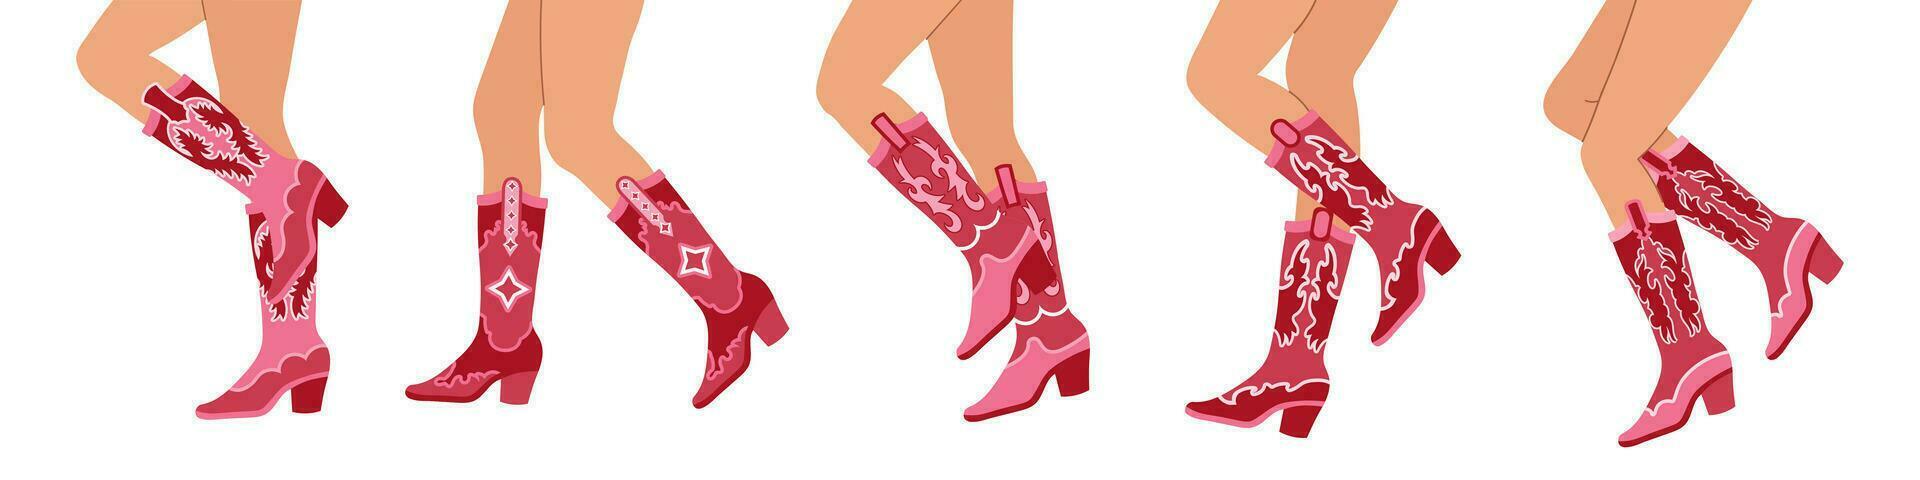 Set of legs in cowboy boots. Various cowgirl boots. Cowboy western theme, wild west, texas. Hand drawn color trendy illustration, vector